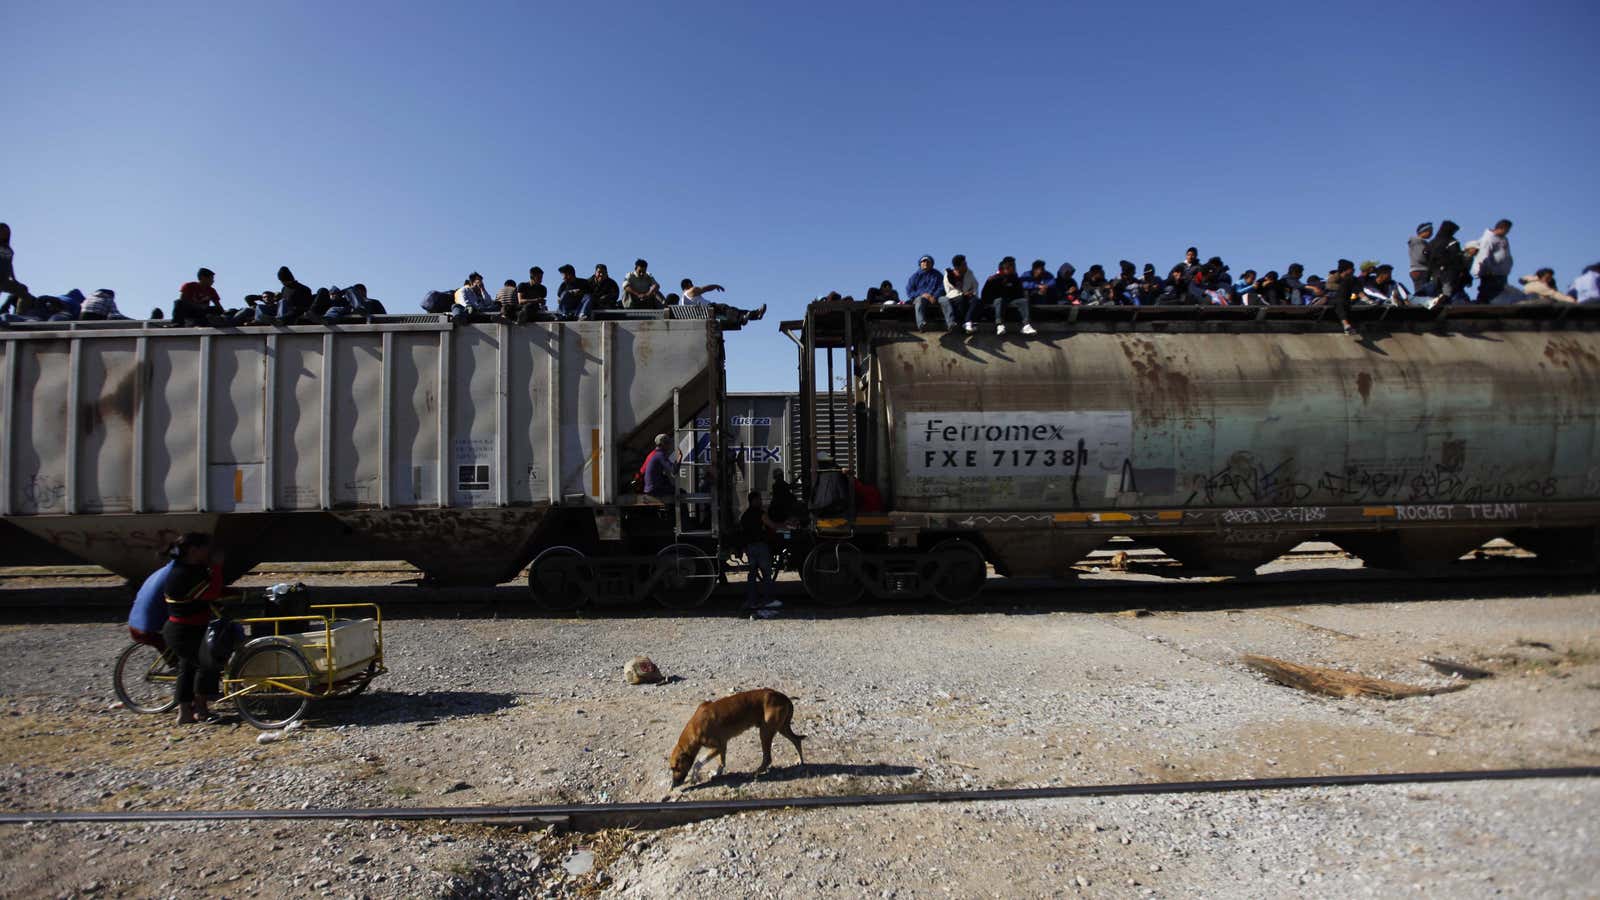 Central American migrants ride on a train in the Mexico’s southern state of Chiapas.